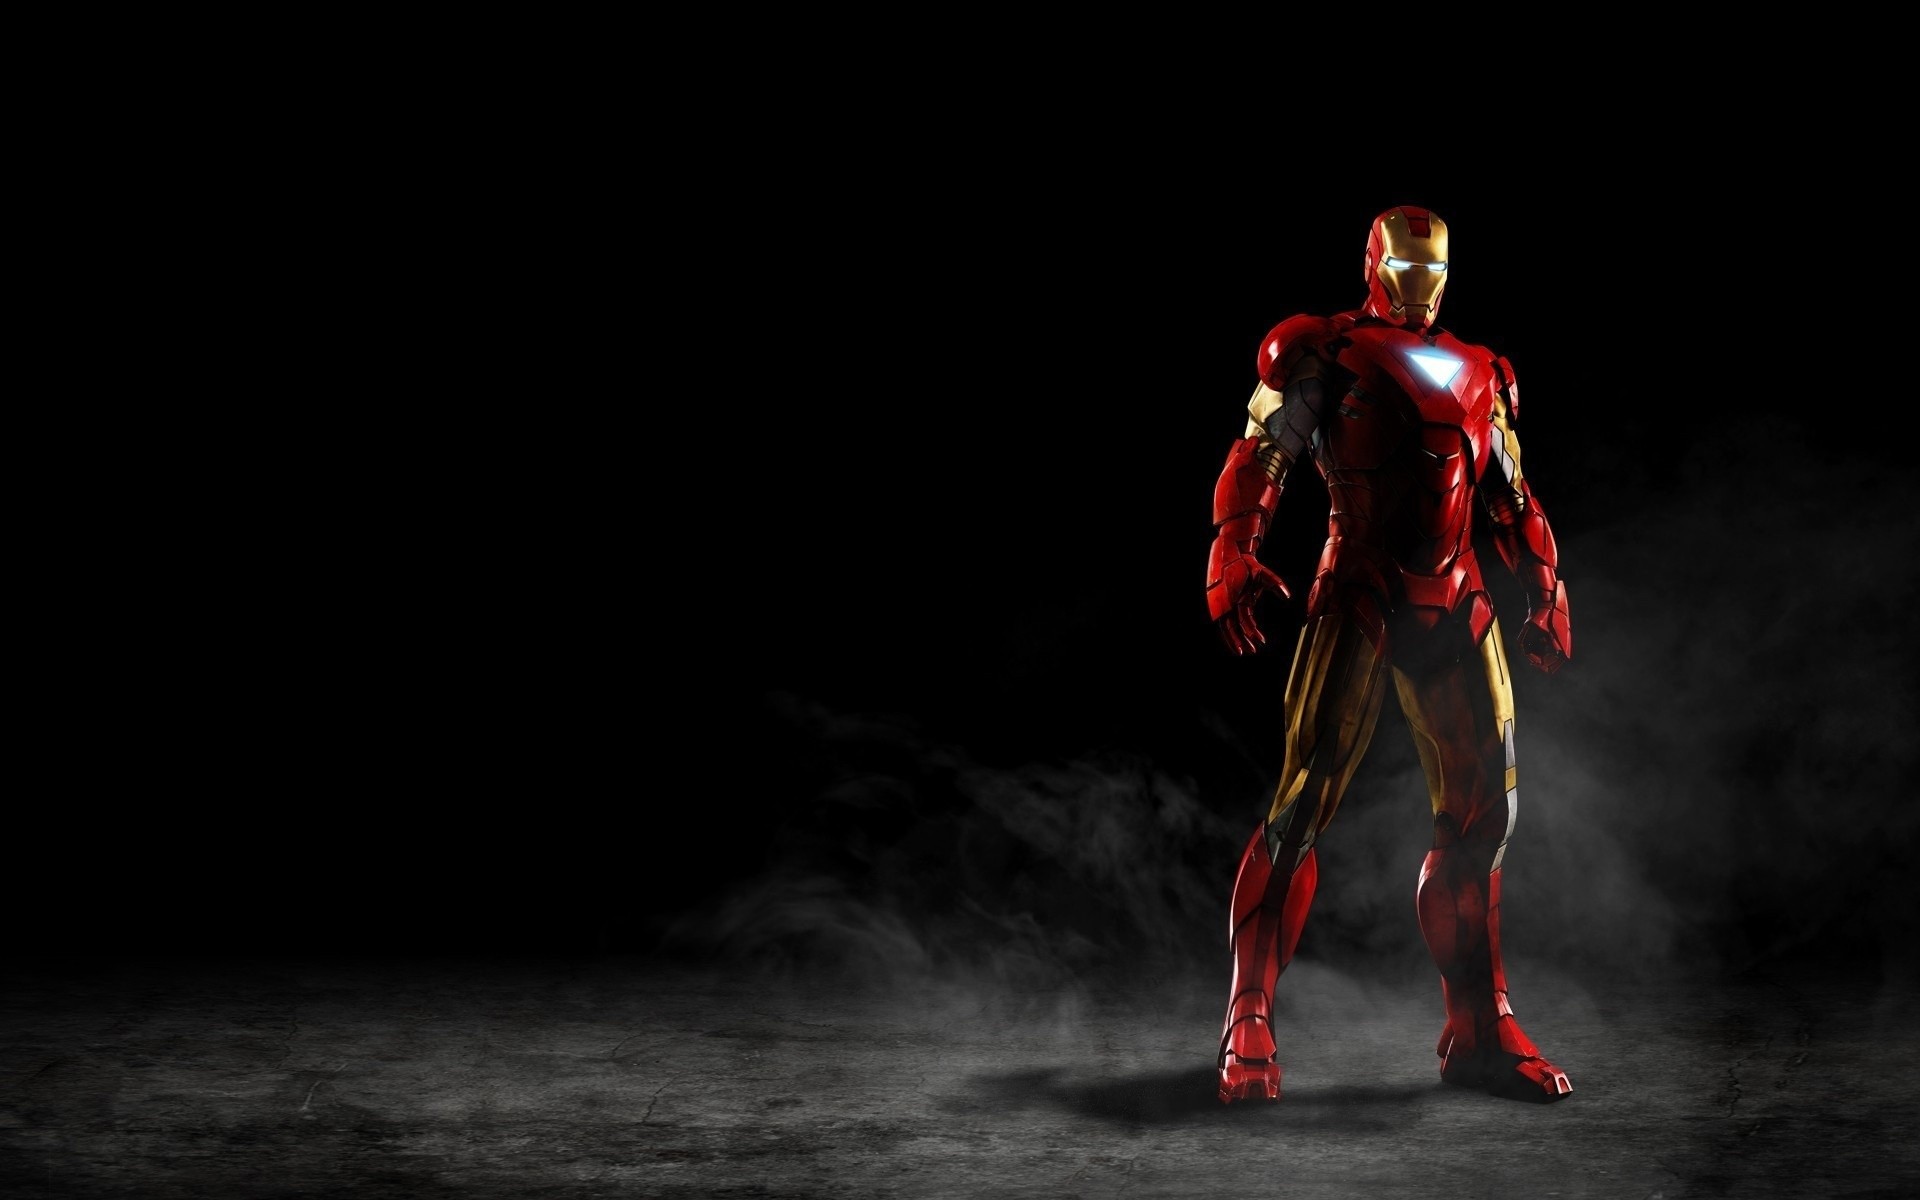 General 1920x1200 Iron Man 3 Iron Man armor simple background movies The Avengers black background Marvel Cinematic Universe Marvel Comics